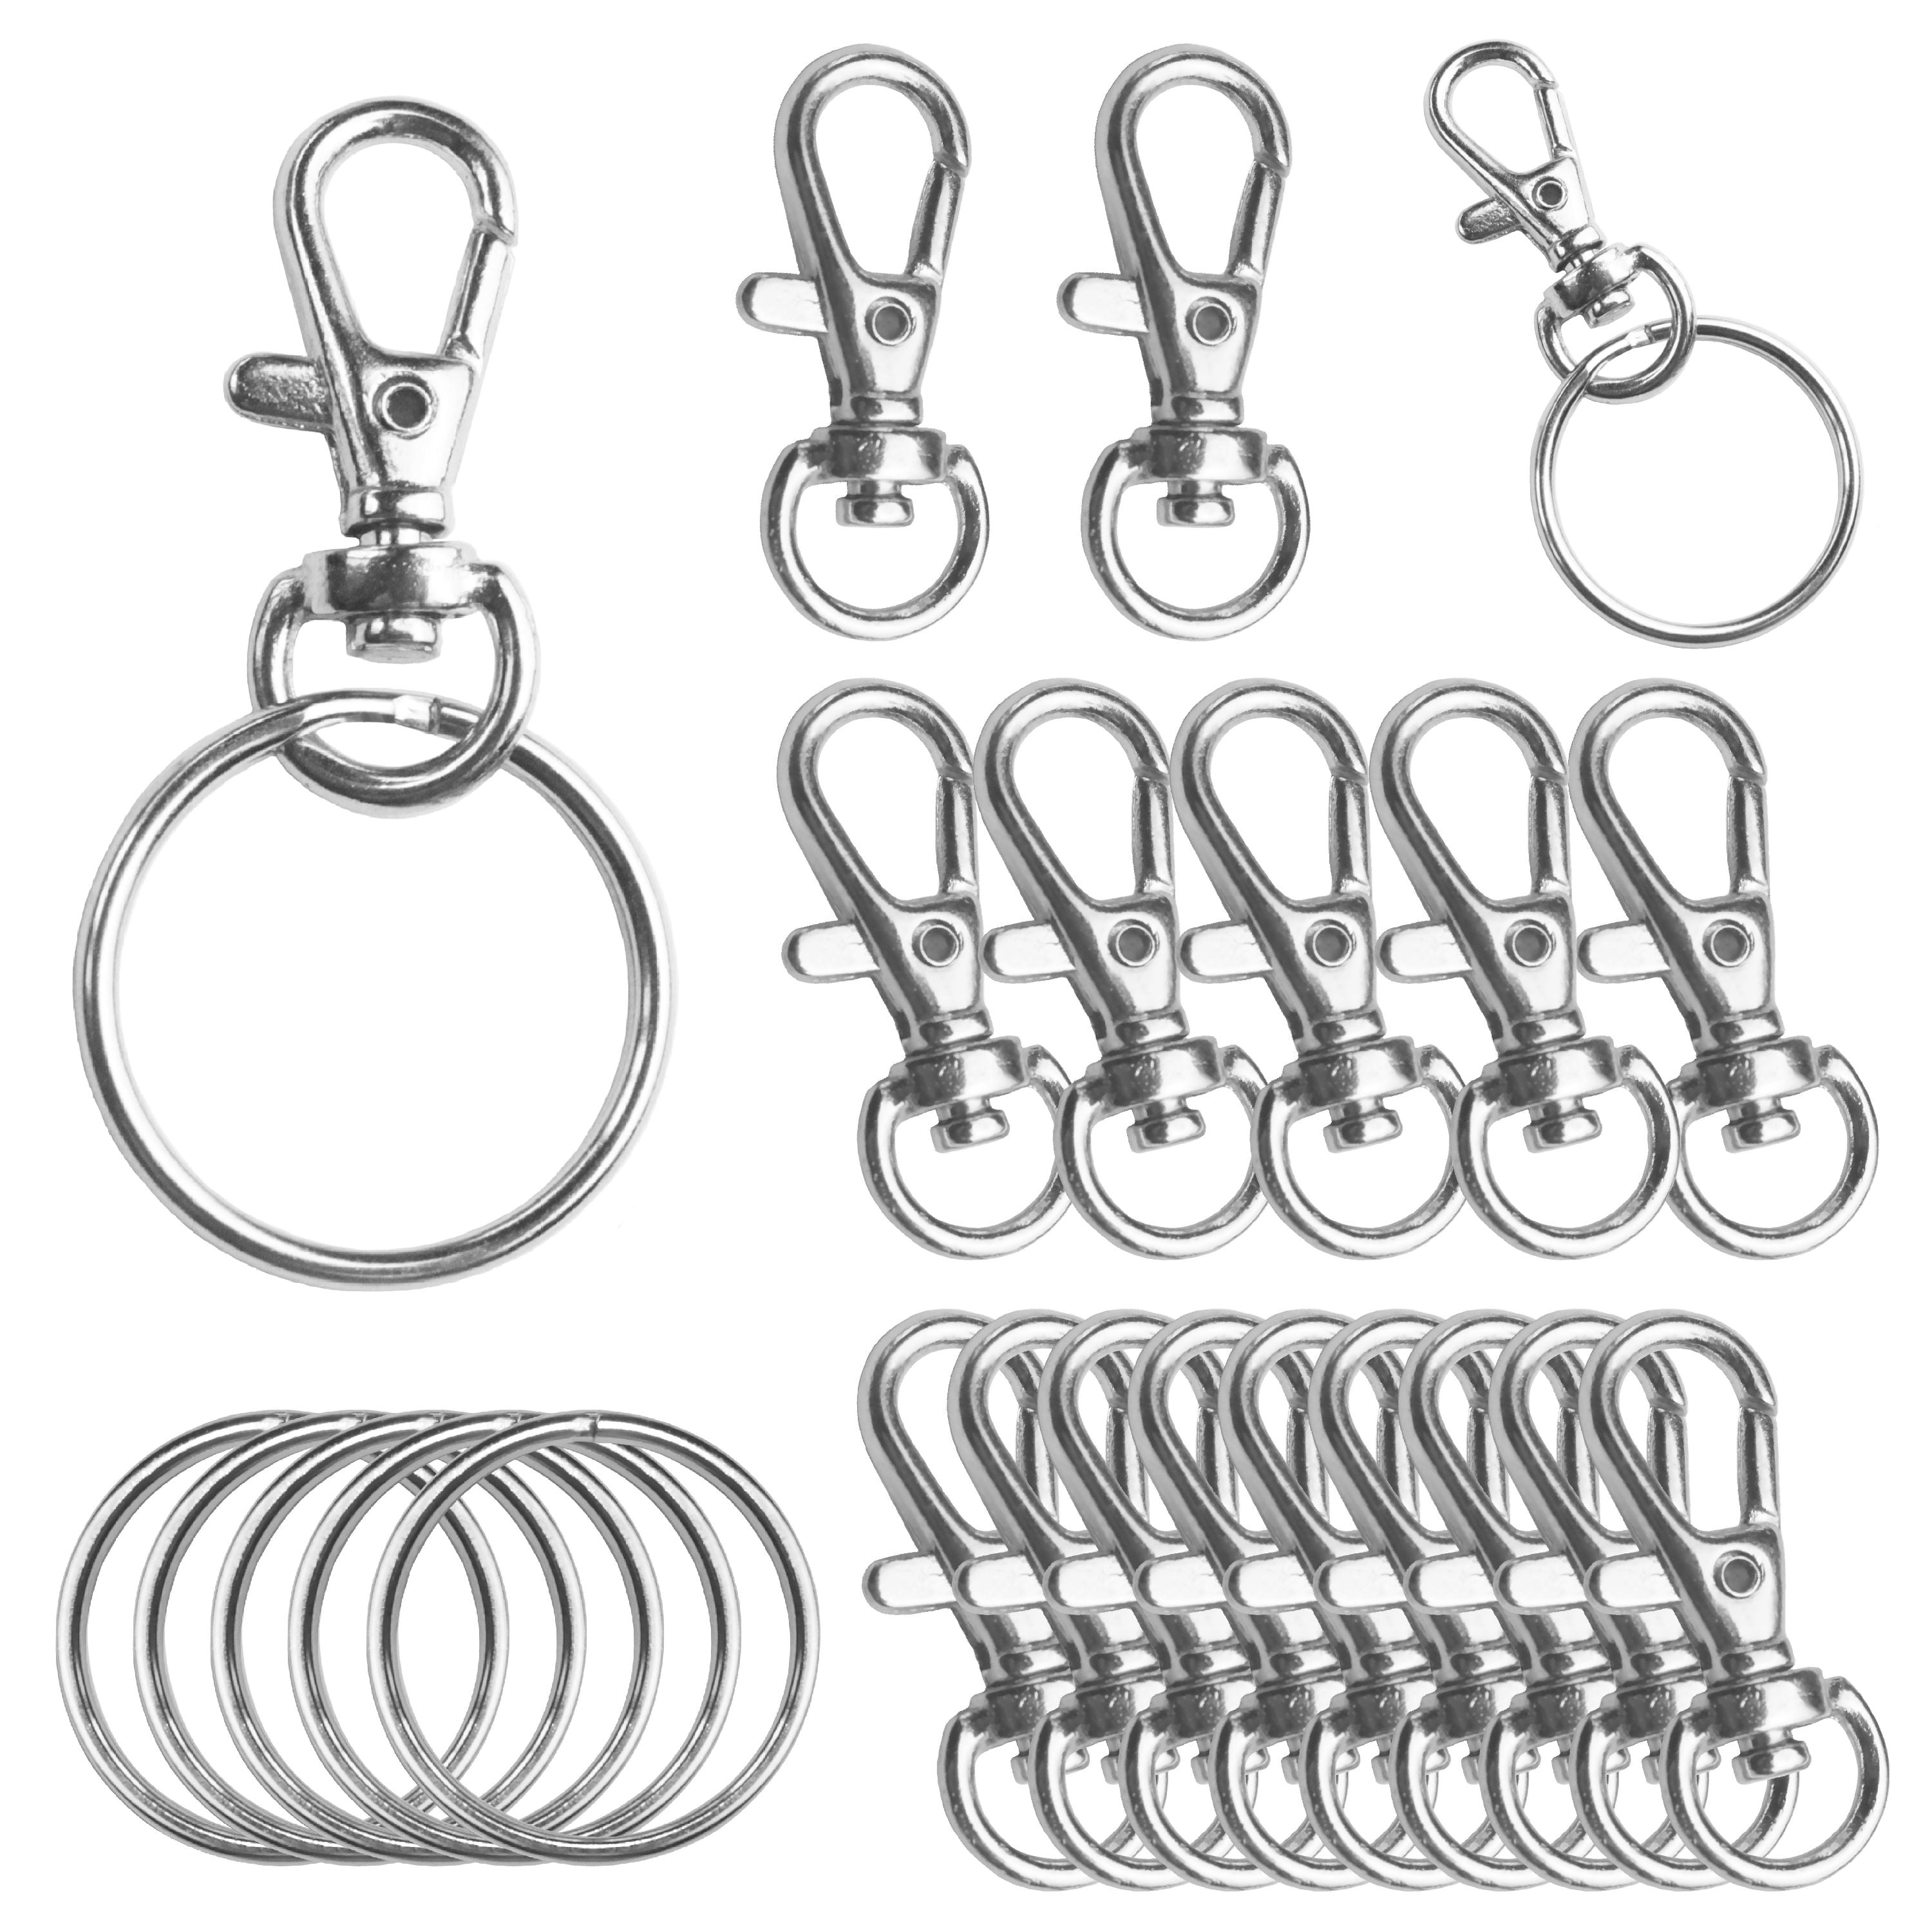 30 Metal Lobster Claw Clasps Swivel Trigger Snap Hooks For Paracord Keychain Bag